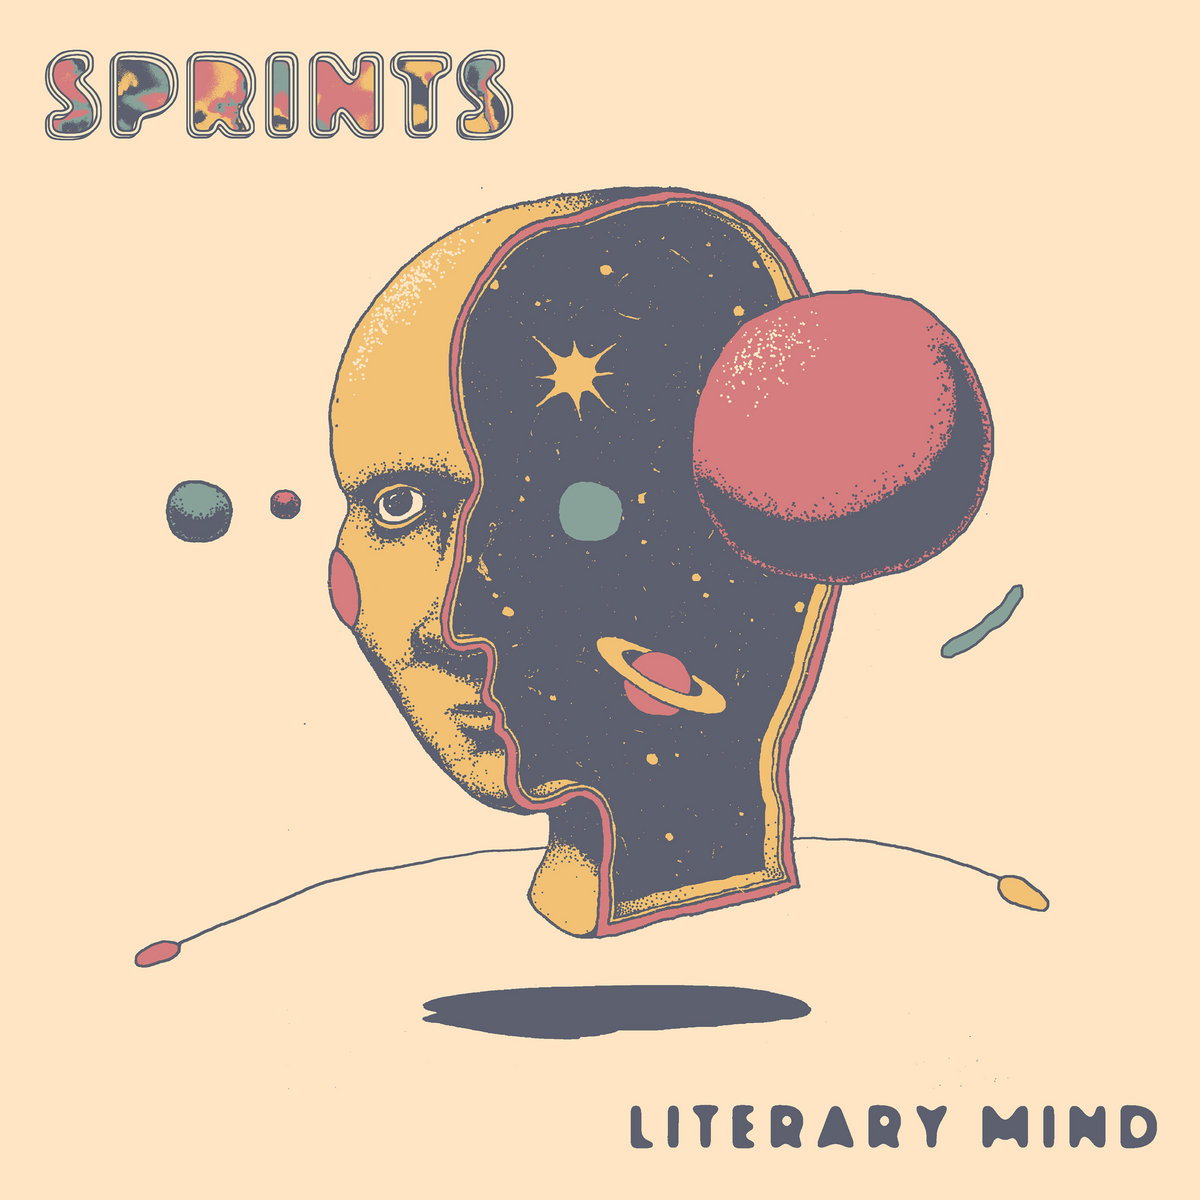 SPRINTS cover